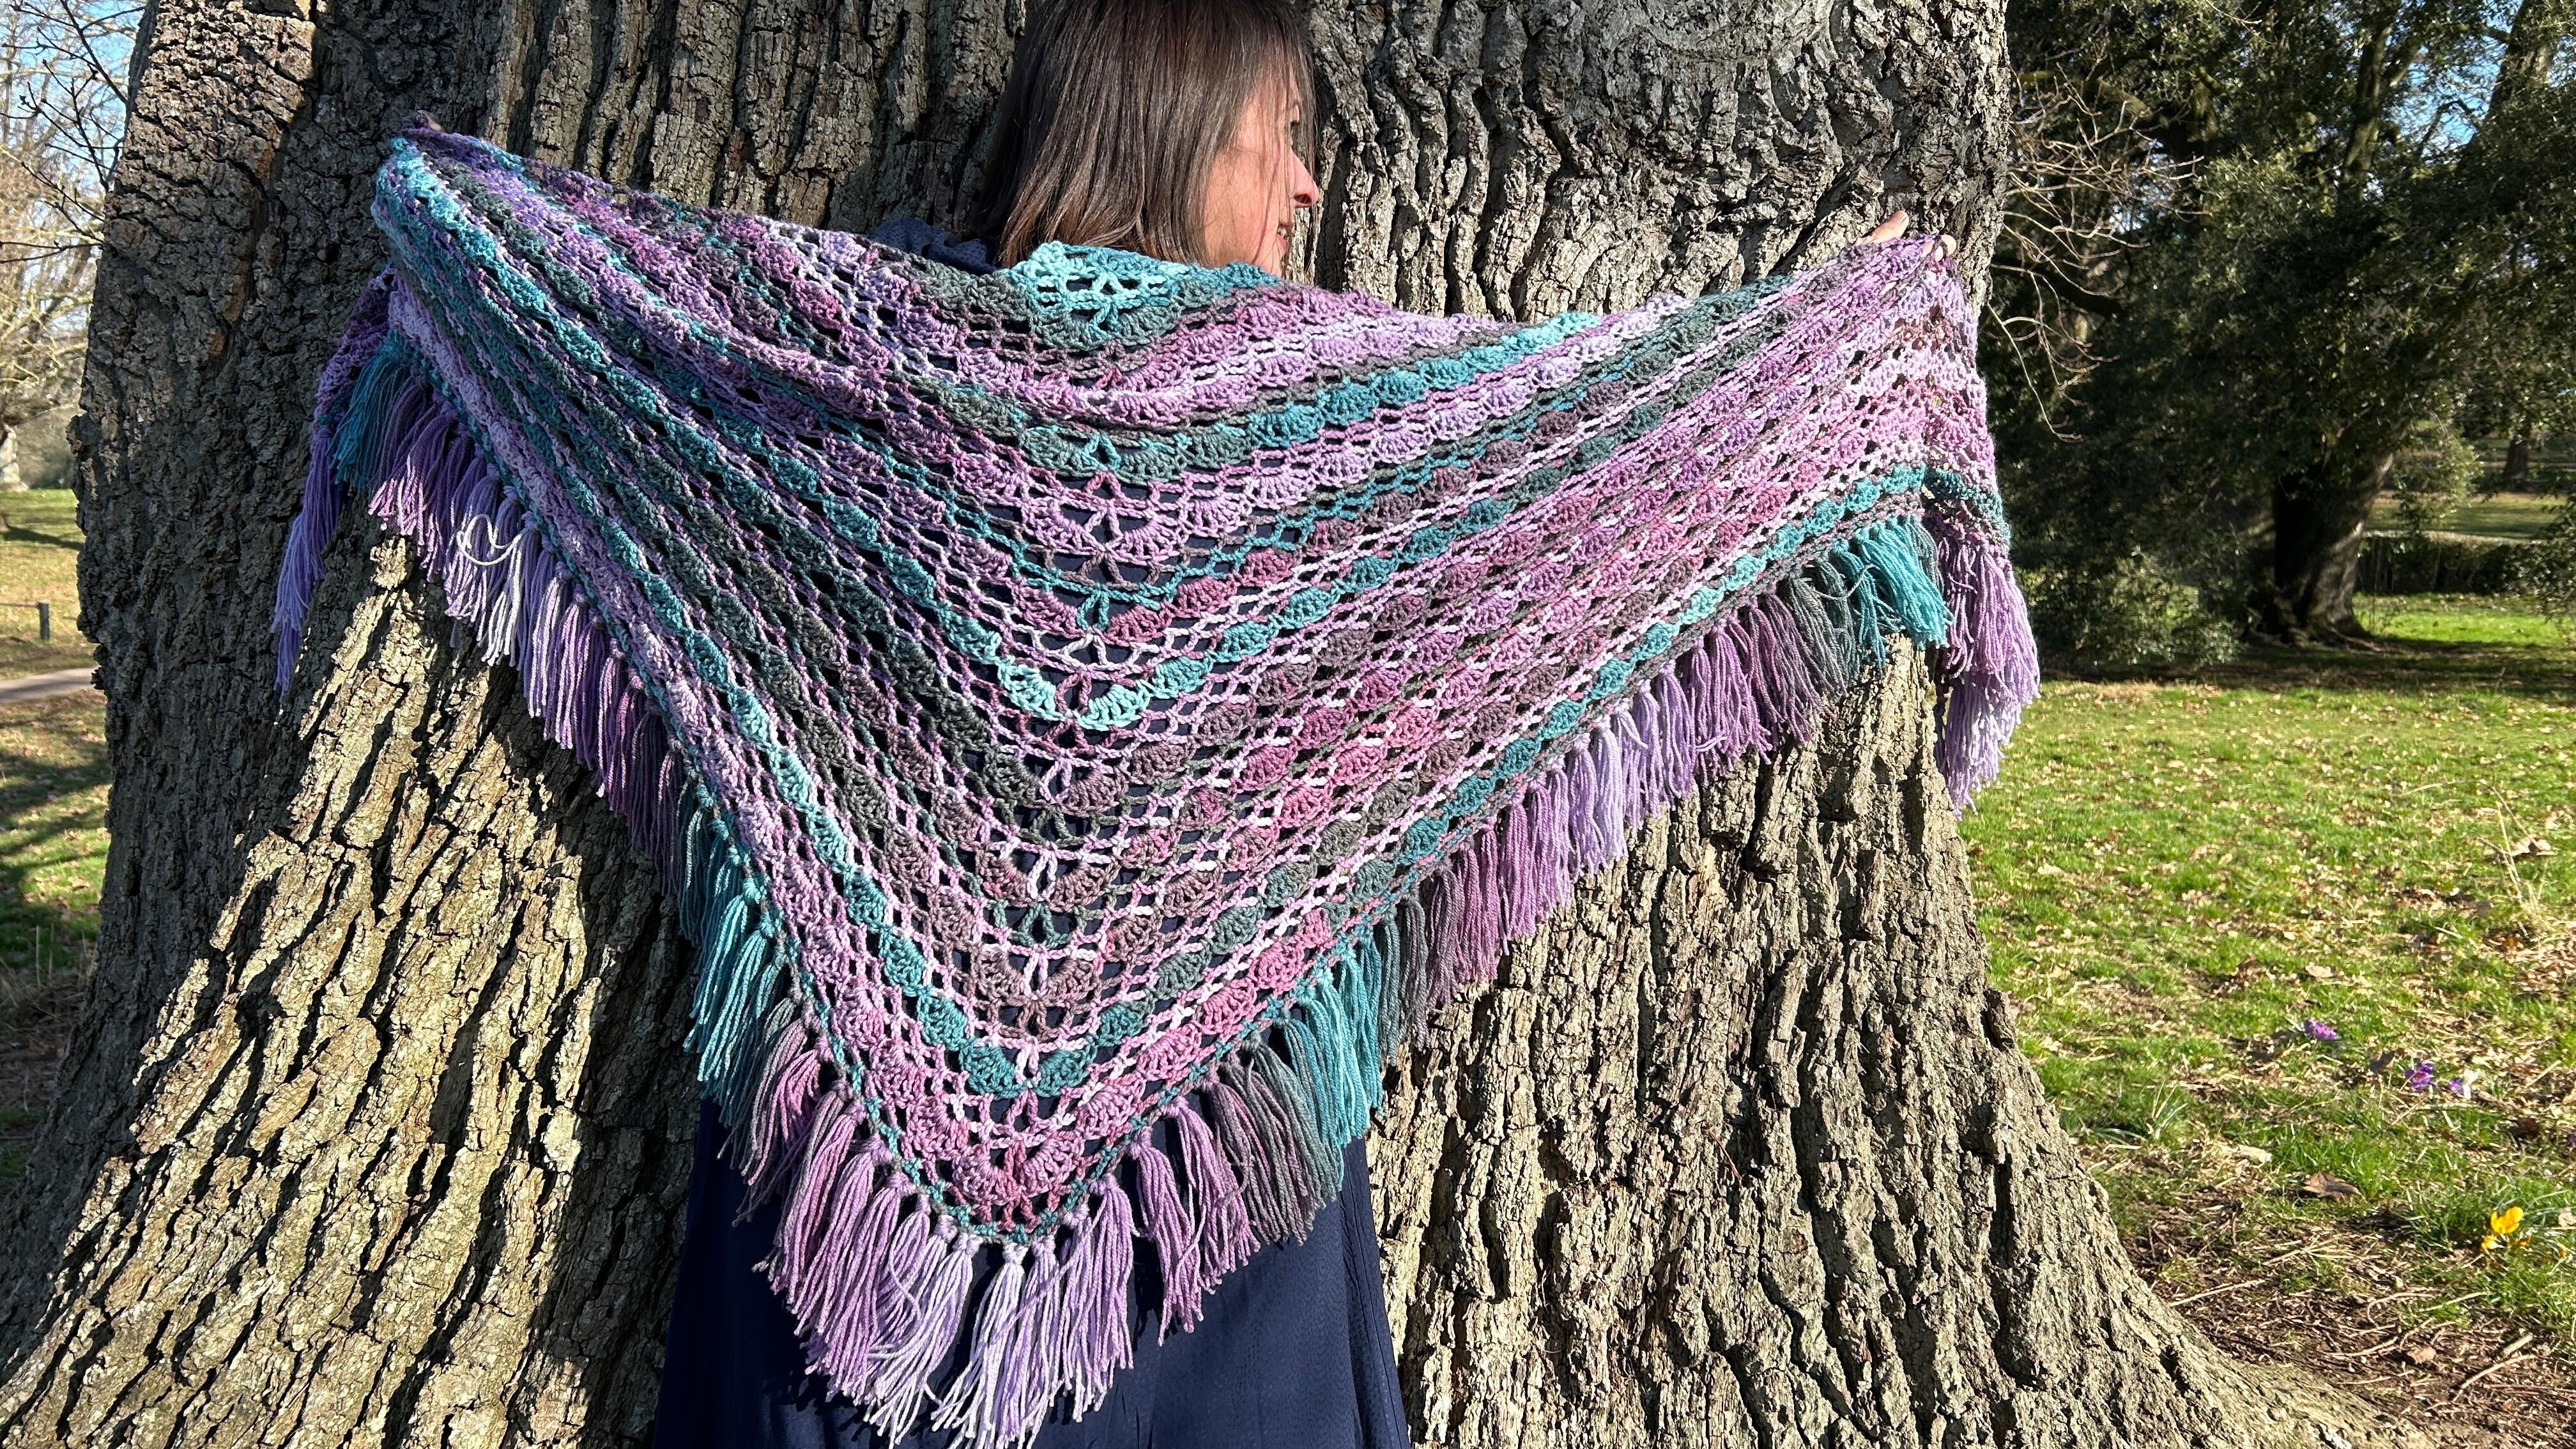 Snow moon shawl worn and standing against a tree